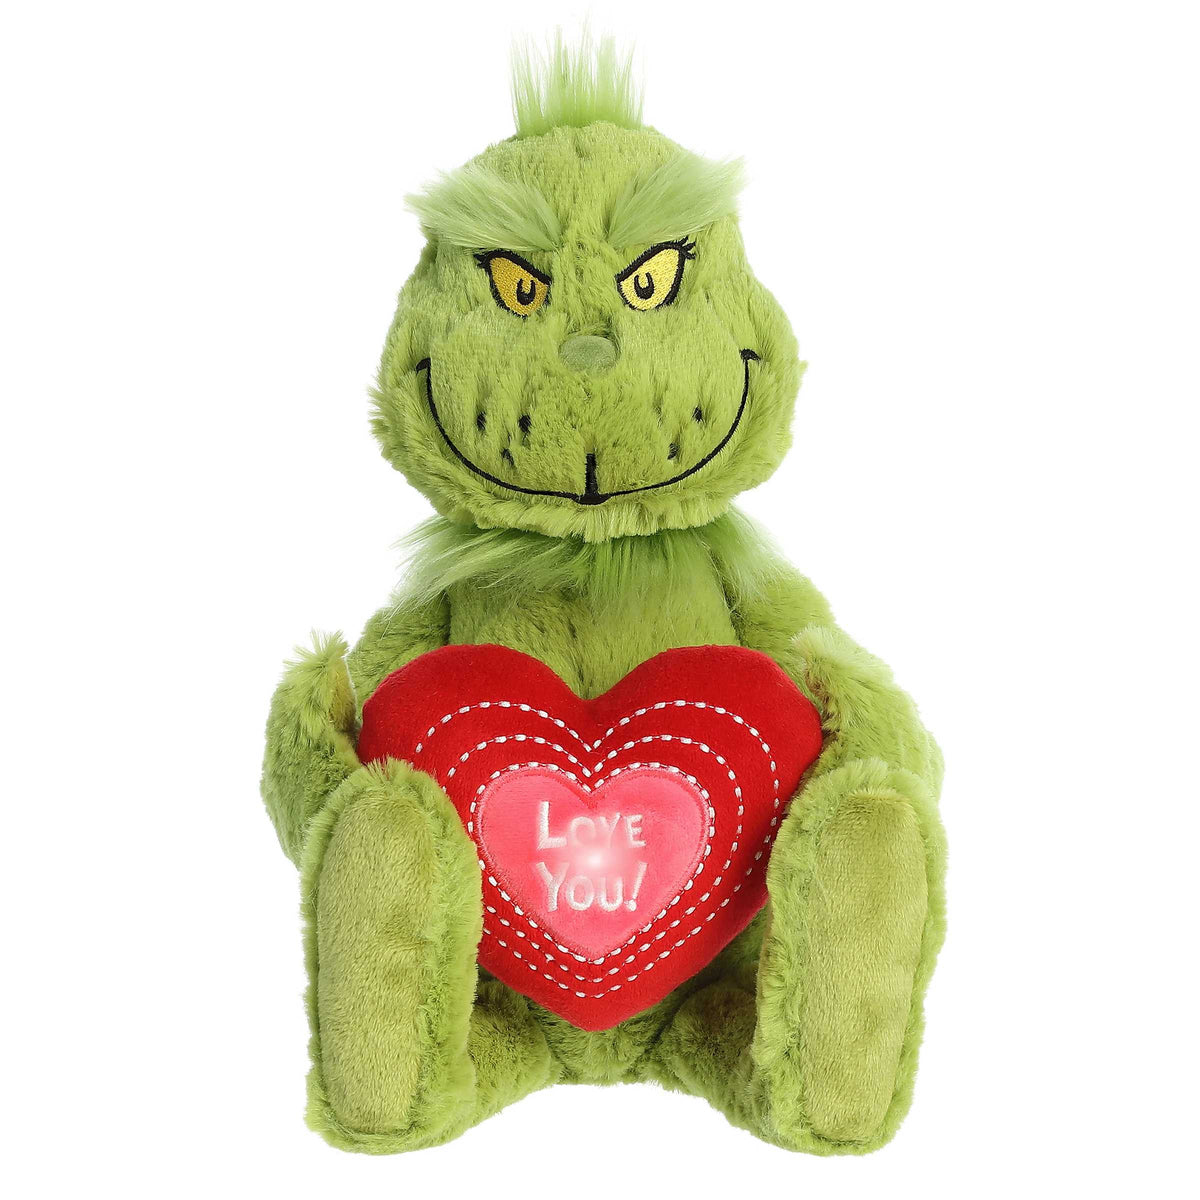 Dr. Seuss Grinch plush holding a light-up 'Love You' heart in its lap, in the seated position with a devious Grinch smile.